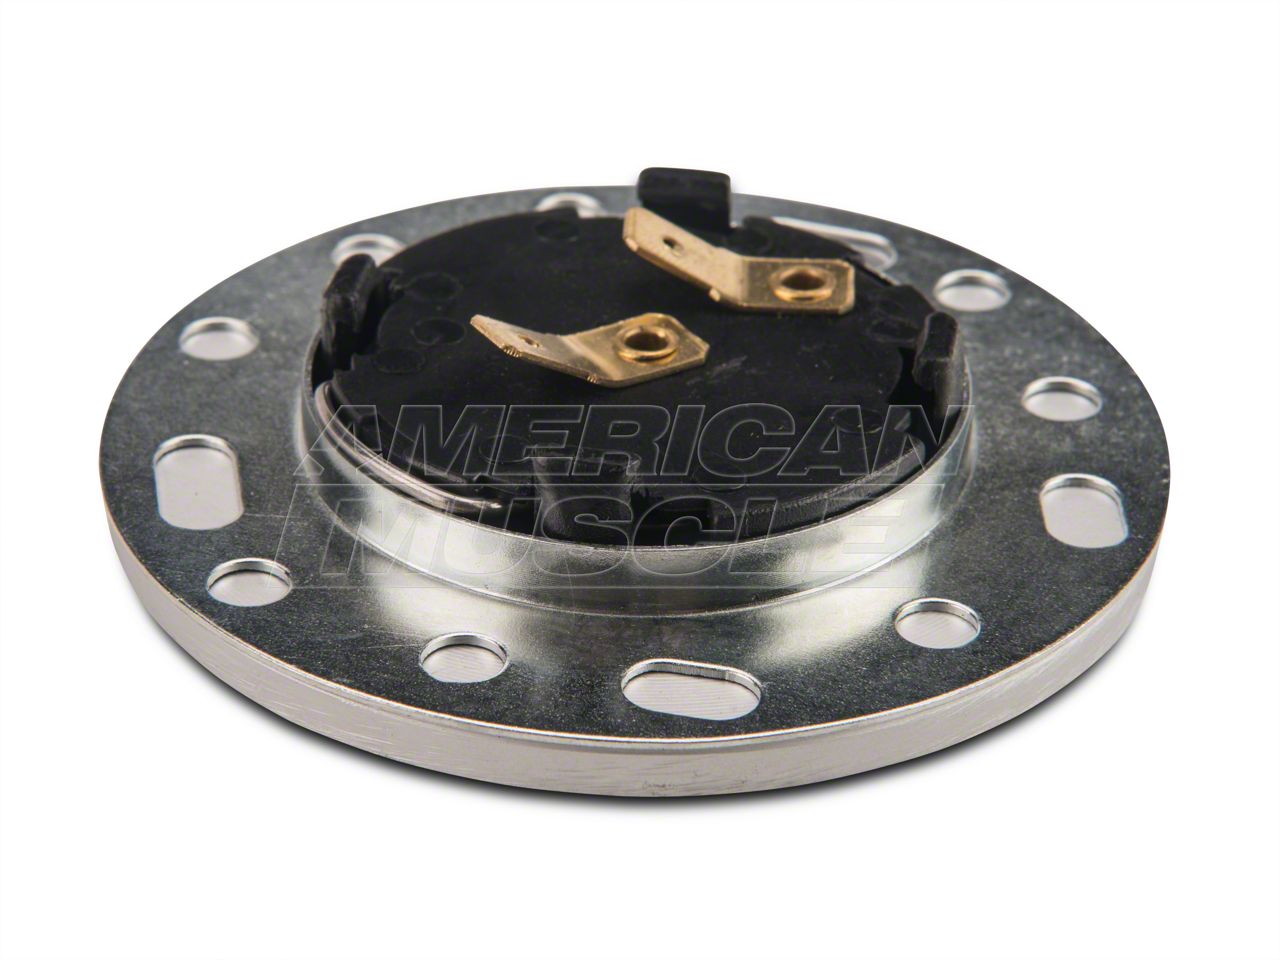 Universal Horn Button Retainer Ring